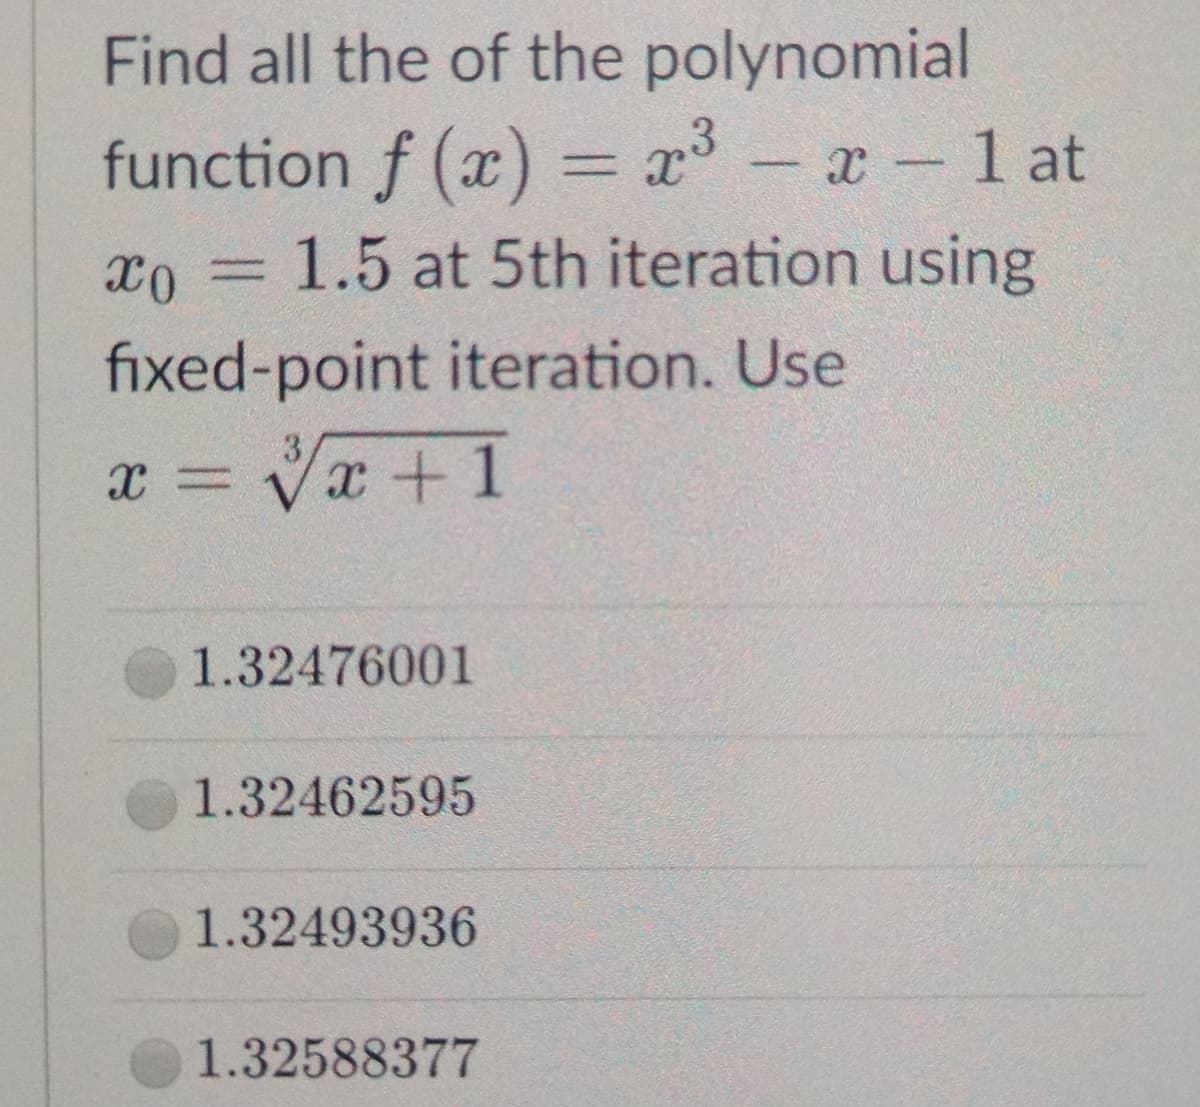 Find all the of the polynomial
function f (x) = x³ - x 1 at
1.5 at 5th iteration using
fixed-point iteration. Use
x = Vx + 1
1.32476001
1.32462595
1.32493936
1.32588377
